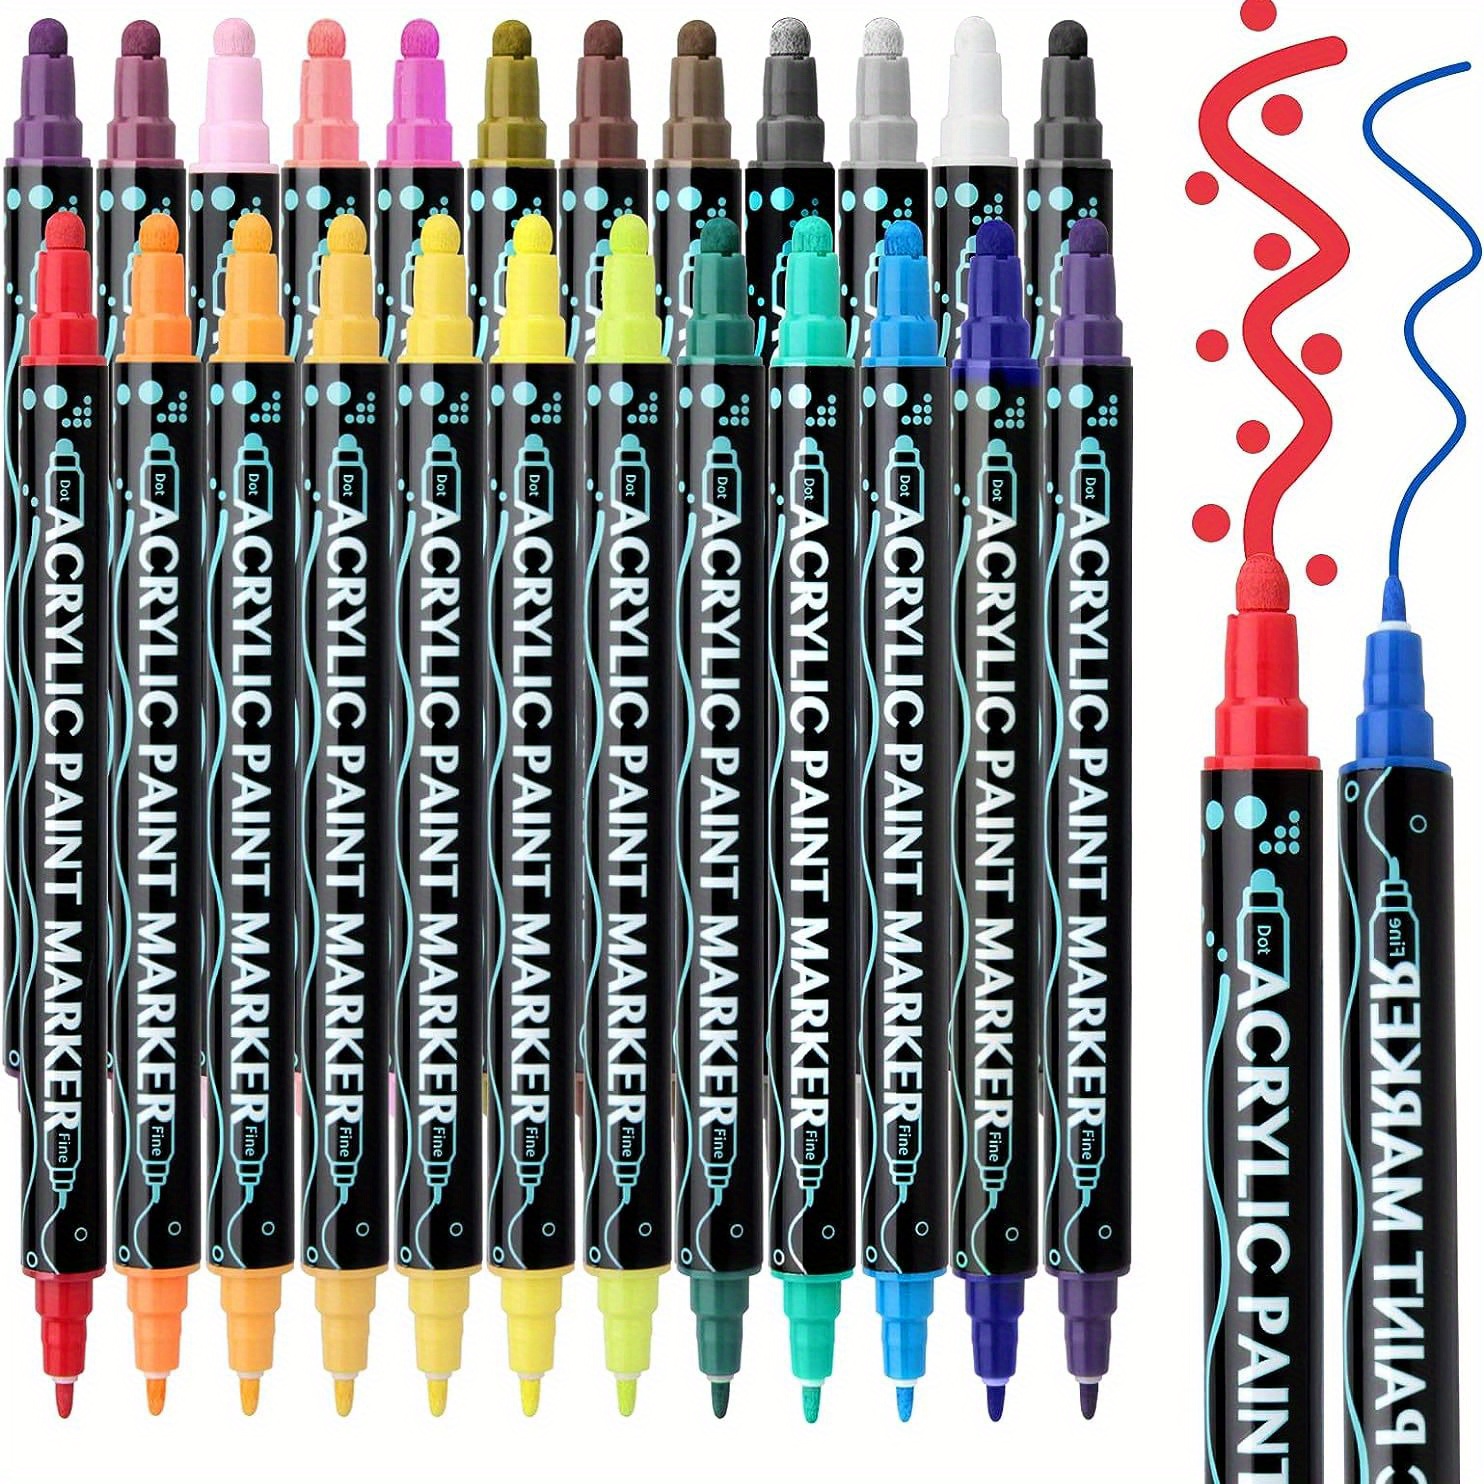 12 Colors Acrylic Paint Pen for Ceramic Painting Permanent Acrylic